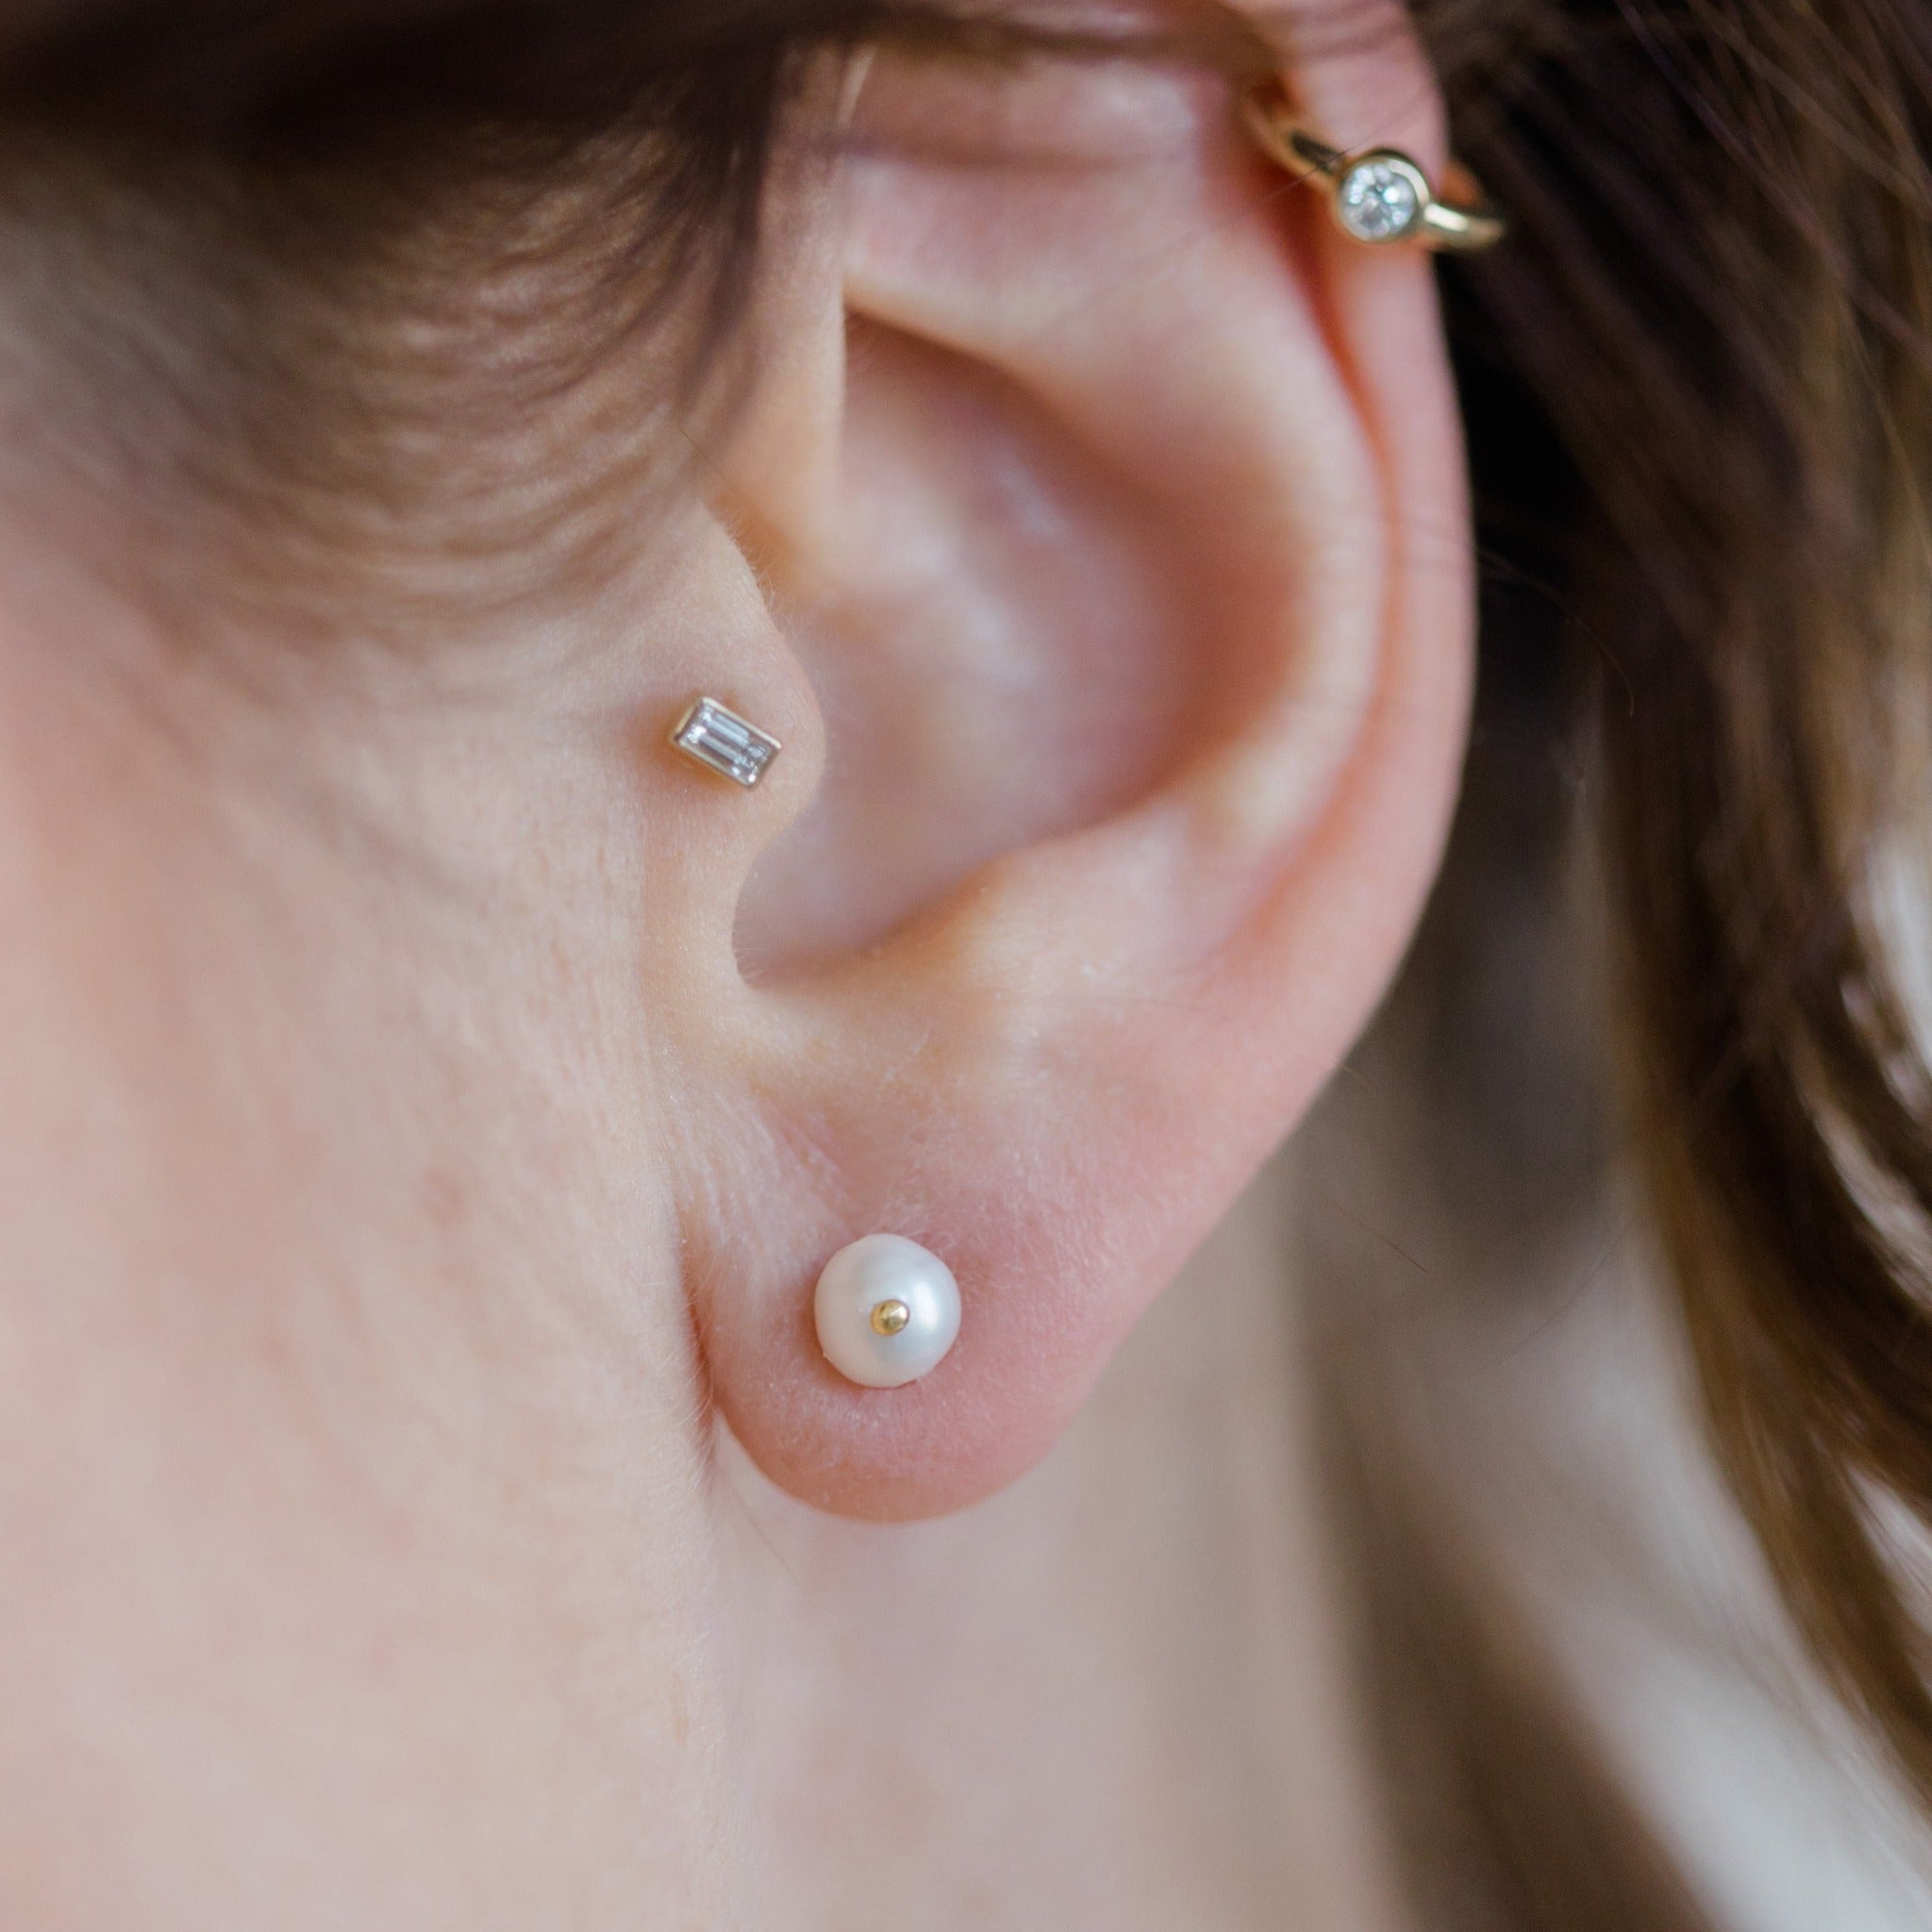 The round pearl stud earring is shown here with other diamond stud earrings. You can create your own curated ear party with this pearl stud earring.